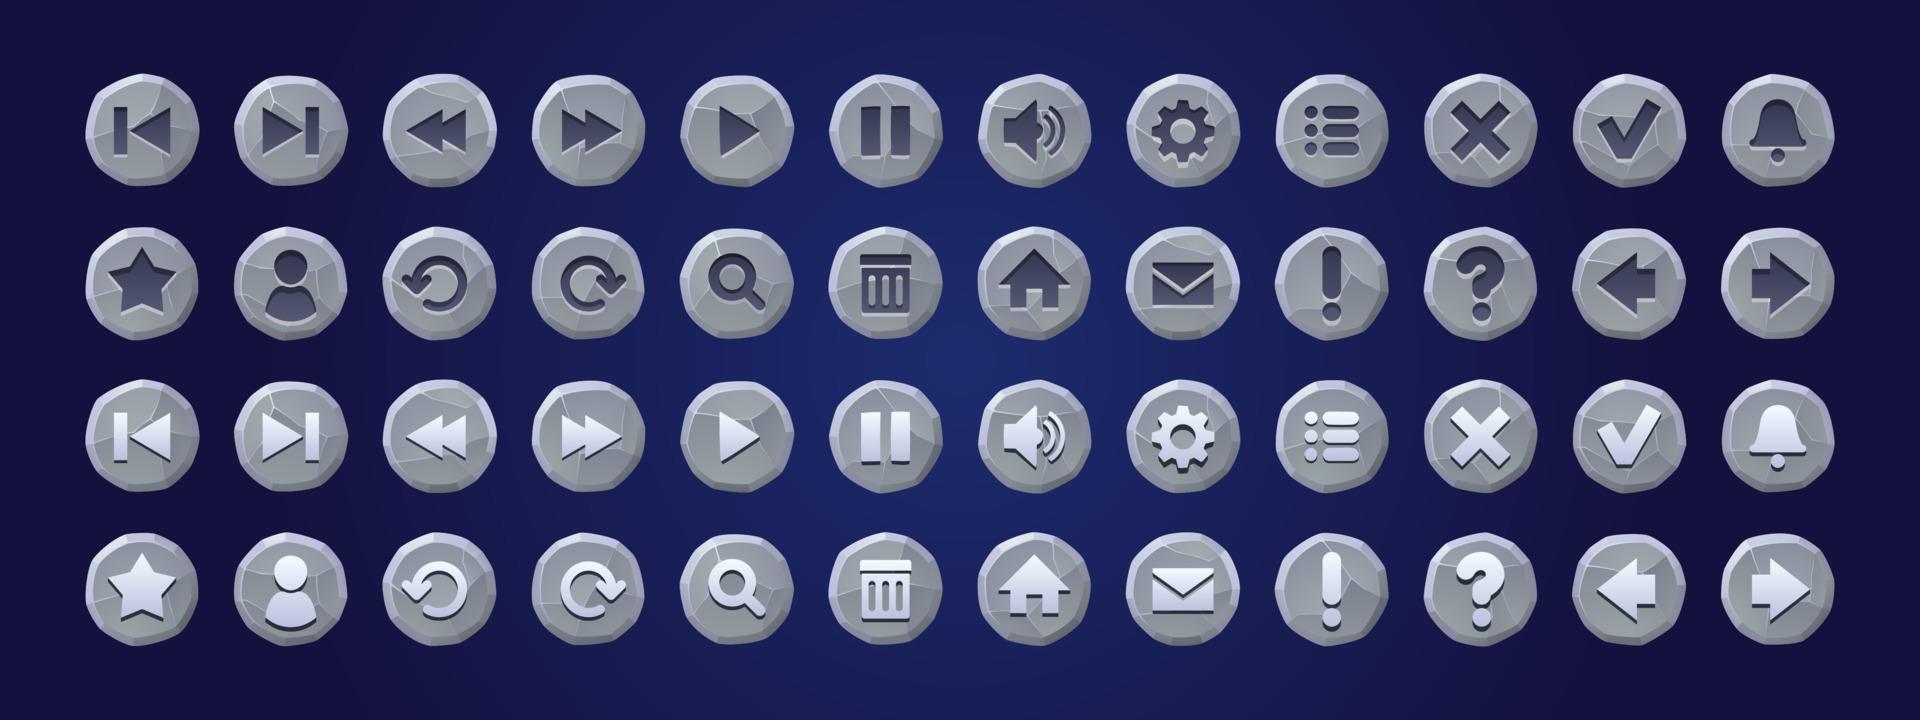 Stone texture buttons for game or app interface vector